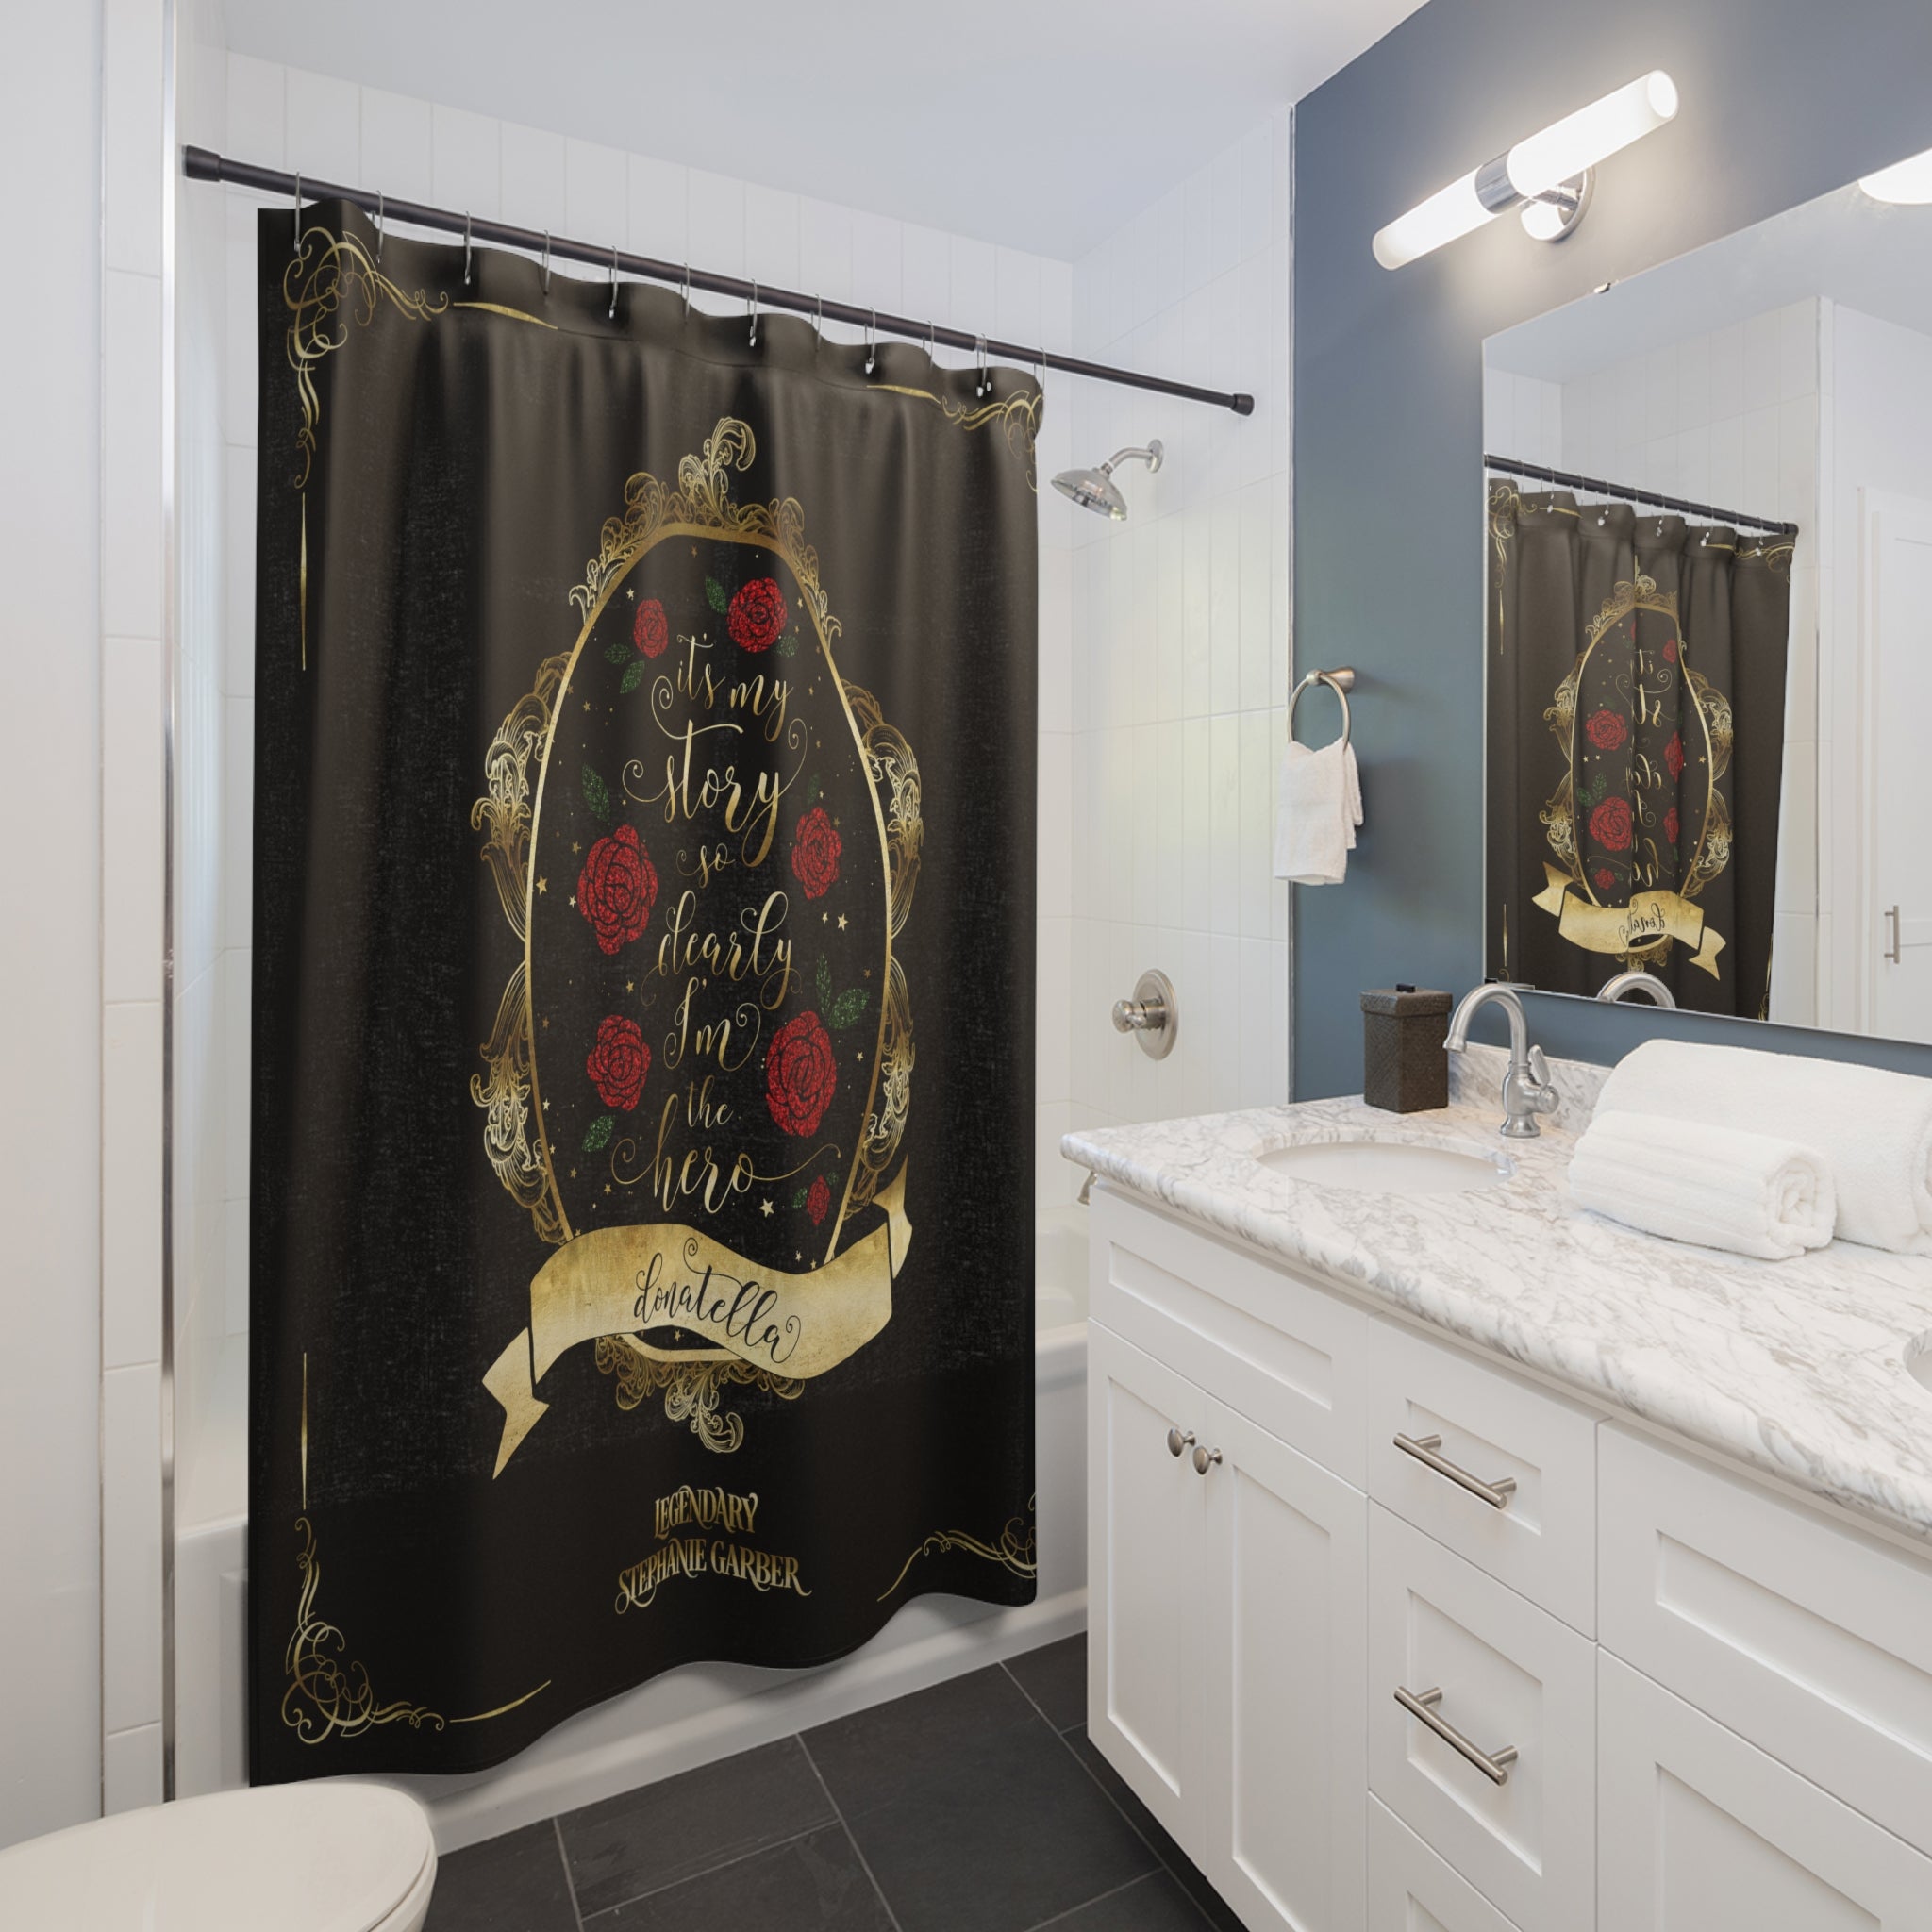 It's my story... Caraval Shower Curtain